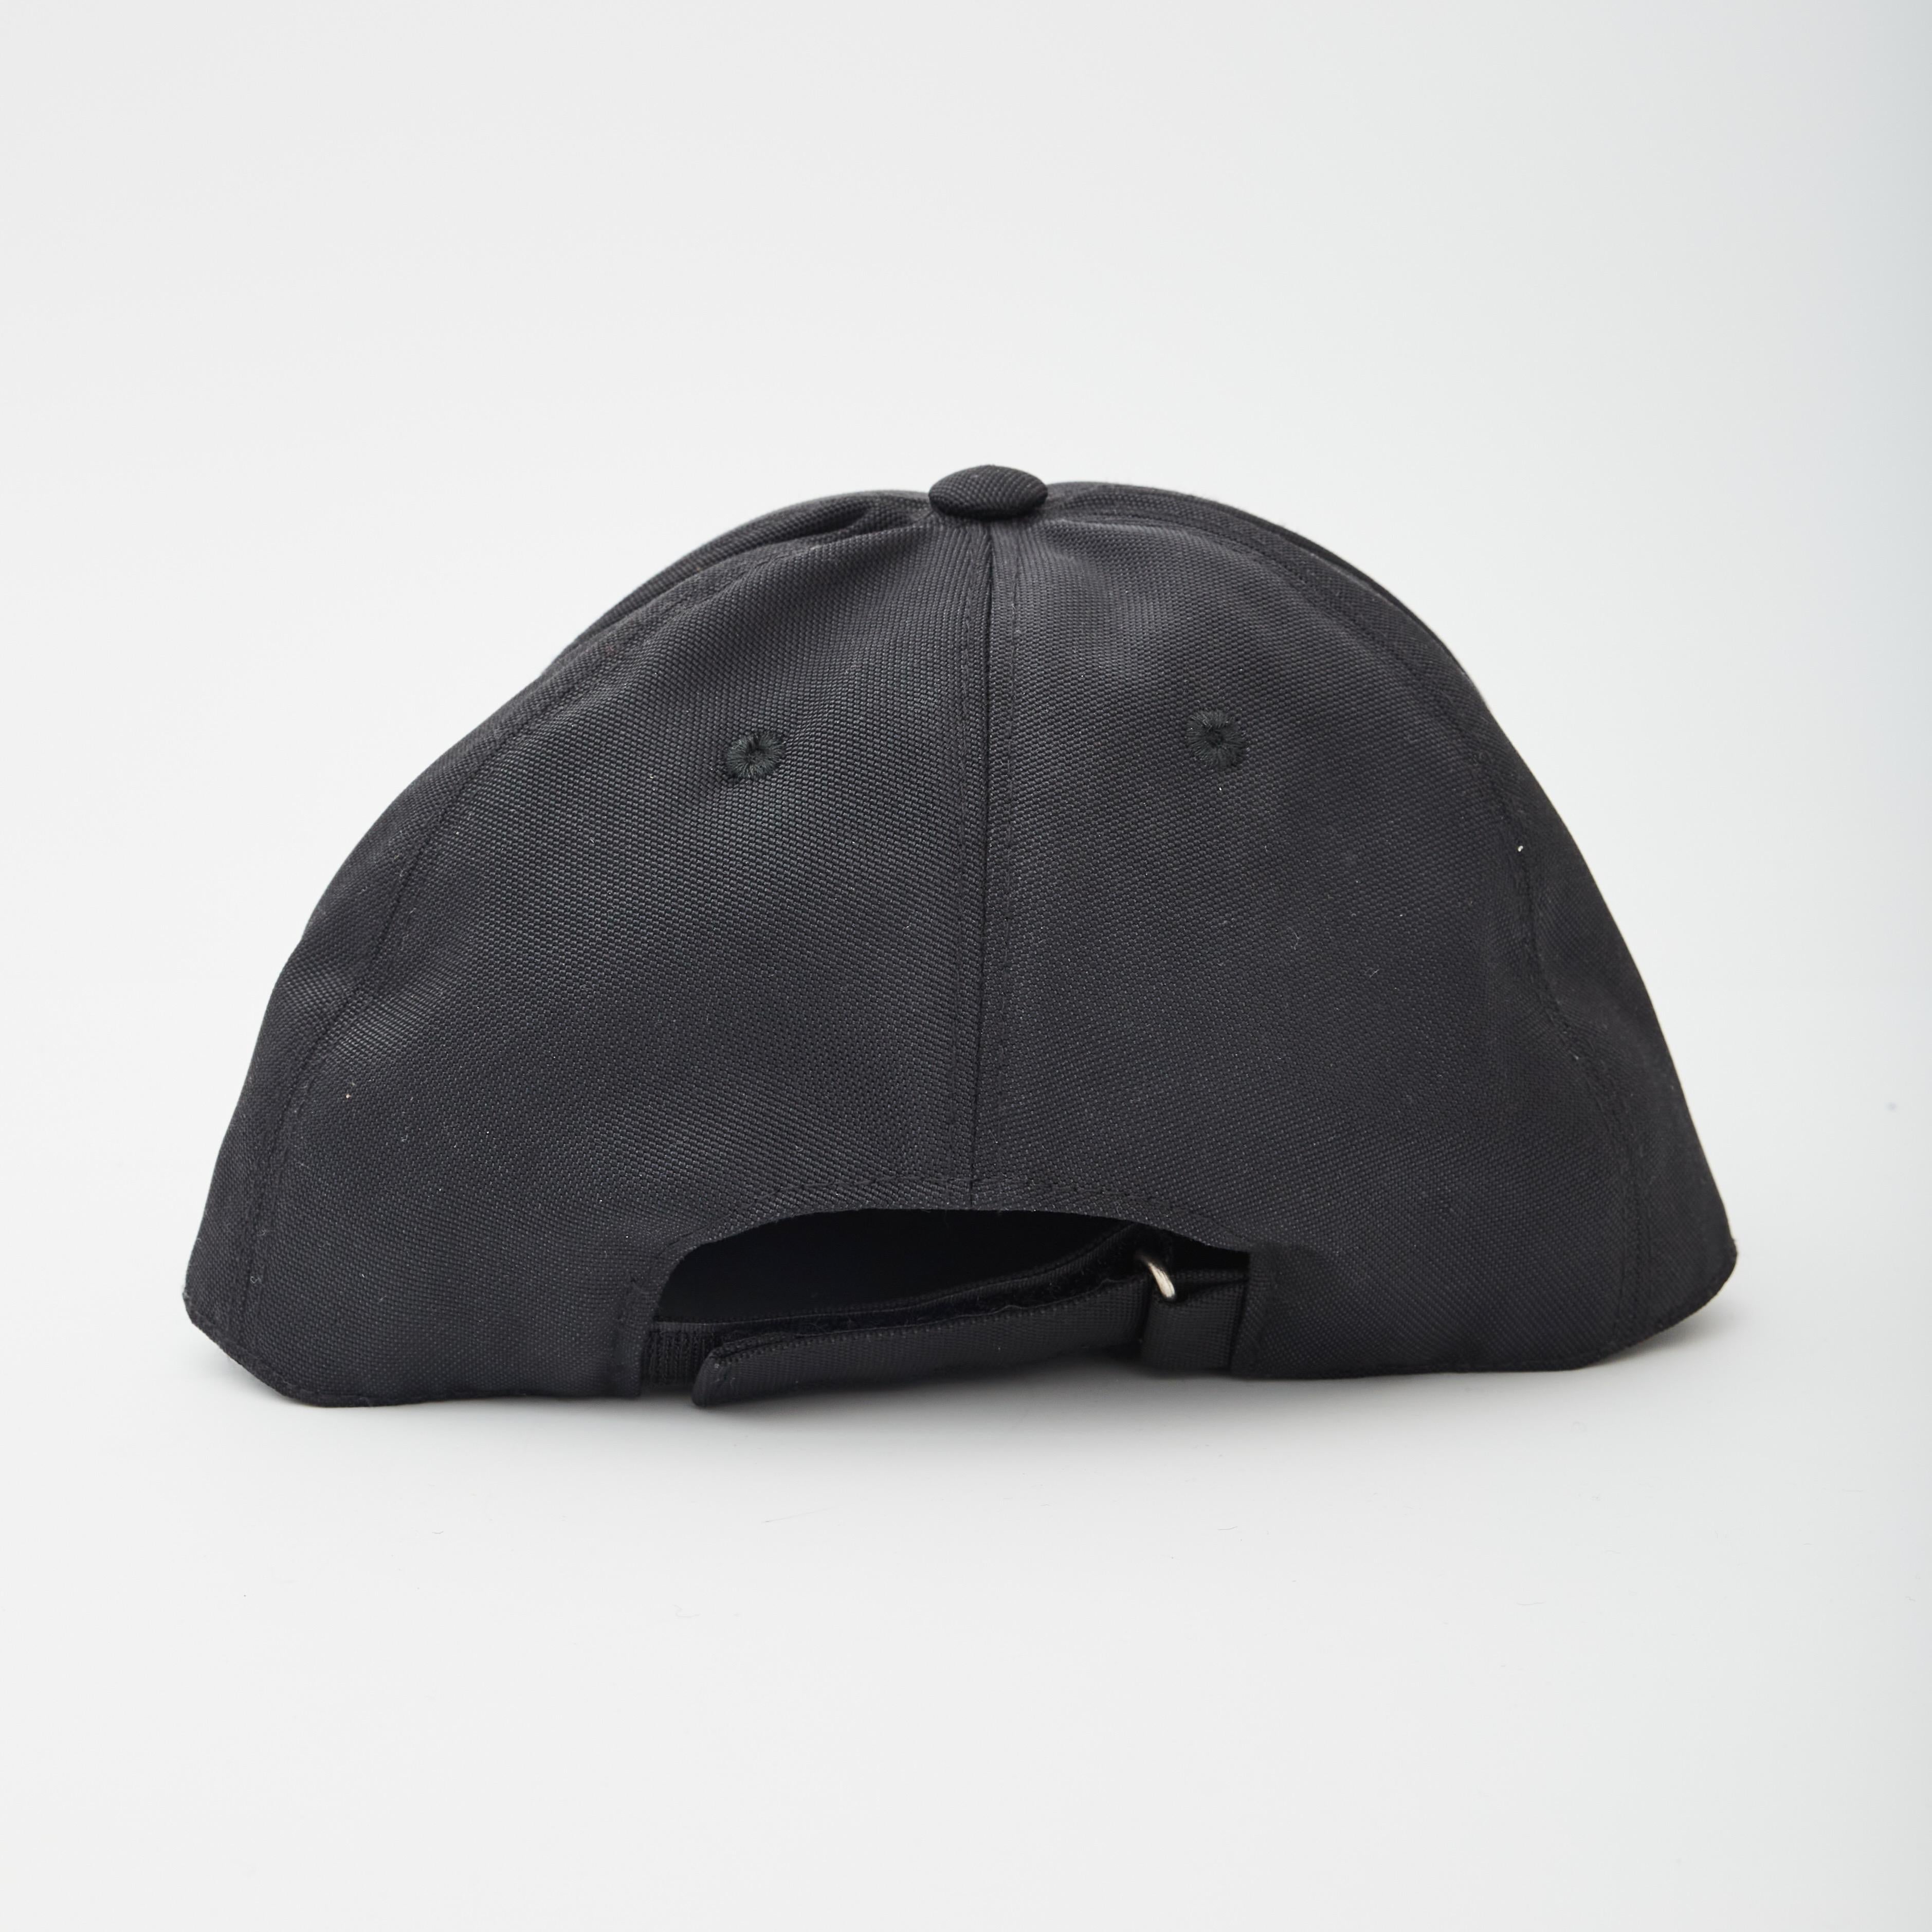 COLOR: Black
MATERIAL: Fabric
SIZE: Adjustable
COMES WITH: Tags
CONDITION: Excellent - hat is pristine.

Made in Italy